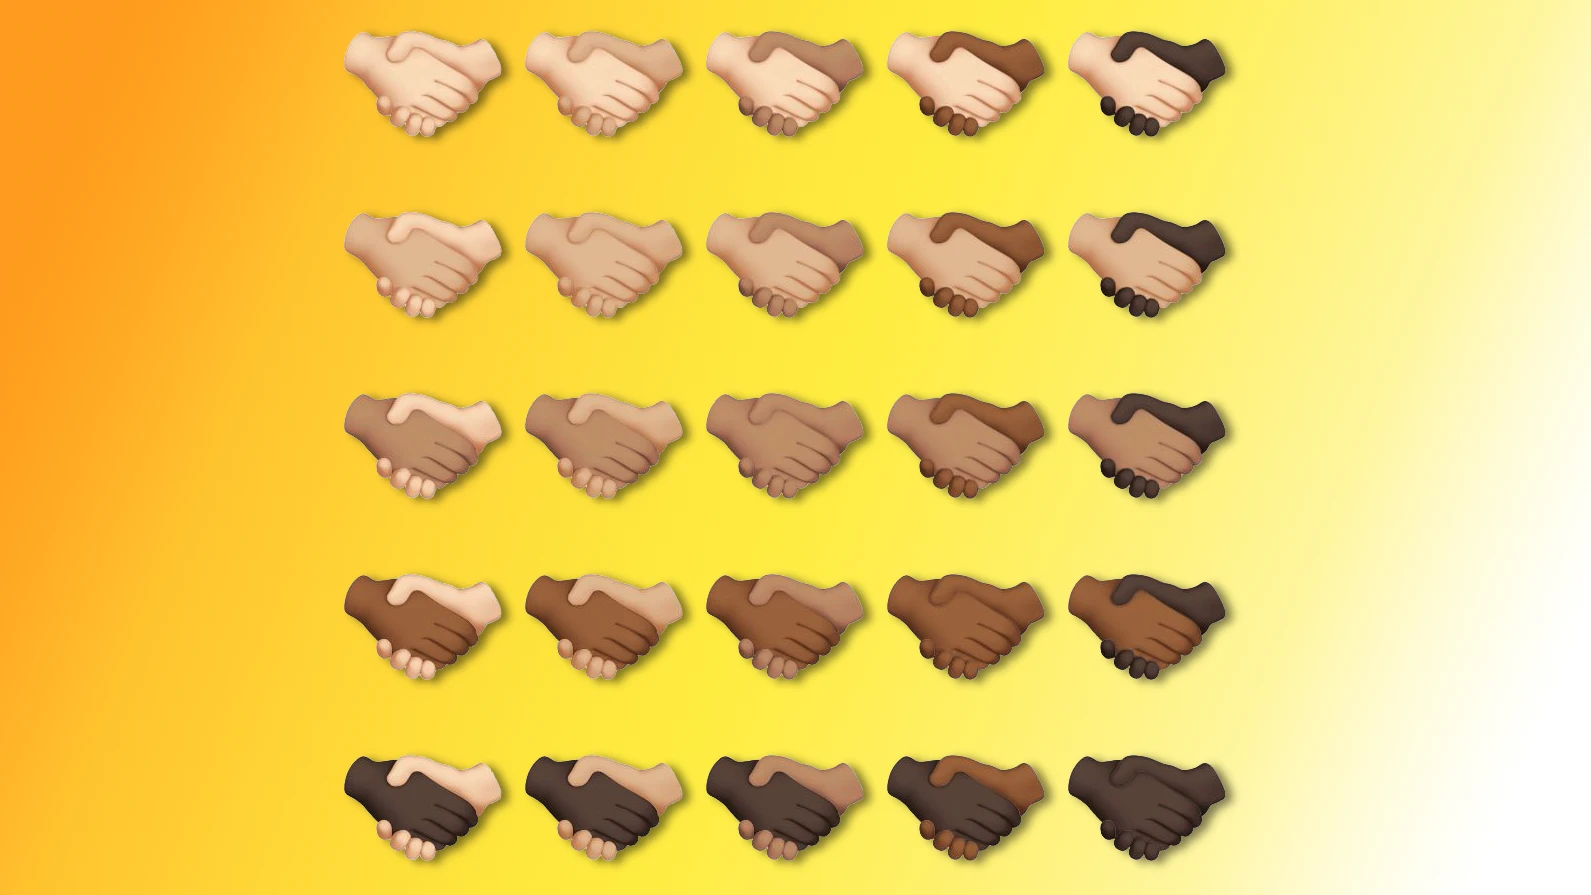 A featured image showcasing the possible skin tone combinations for the left and right hand of the handshake emoji in iOS 15.4, iPadOS 15.4 and macOS Monterey 12.3